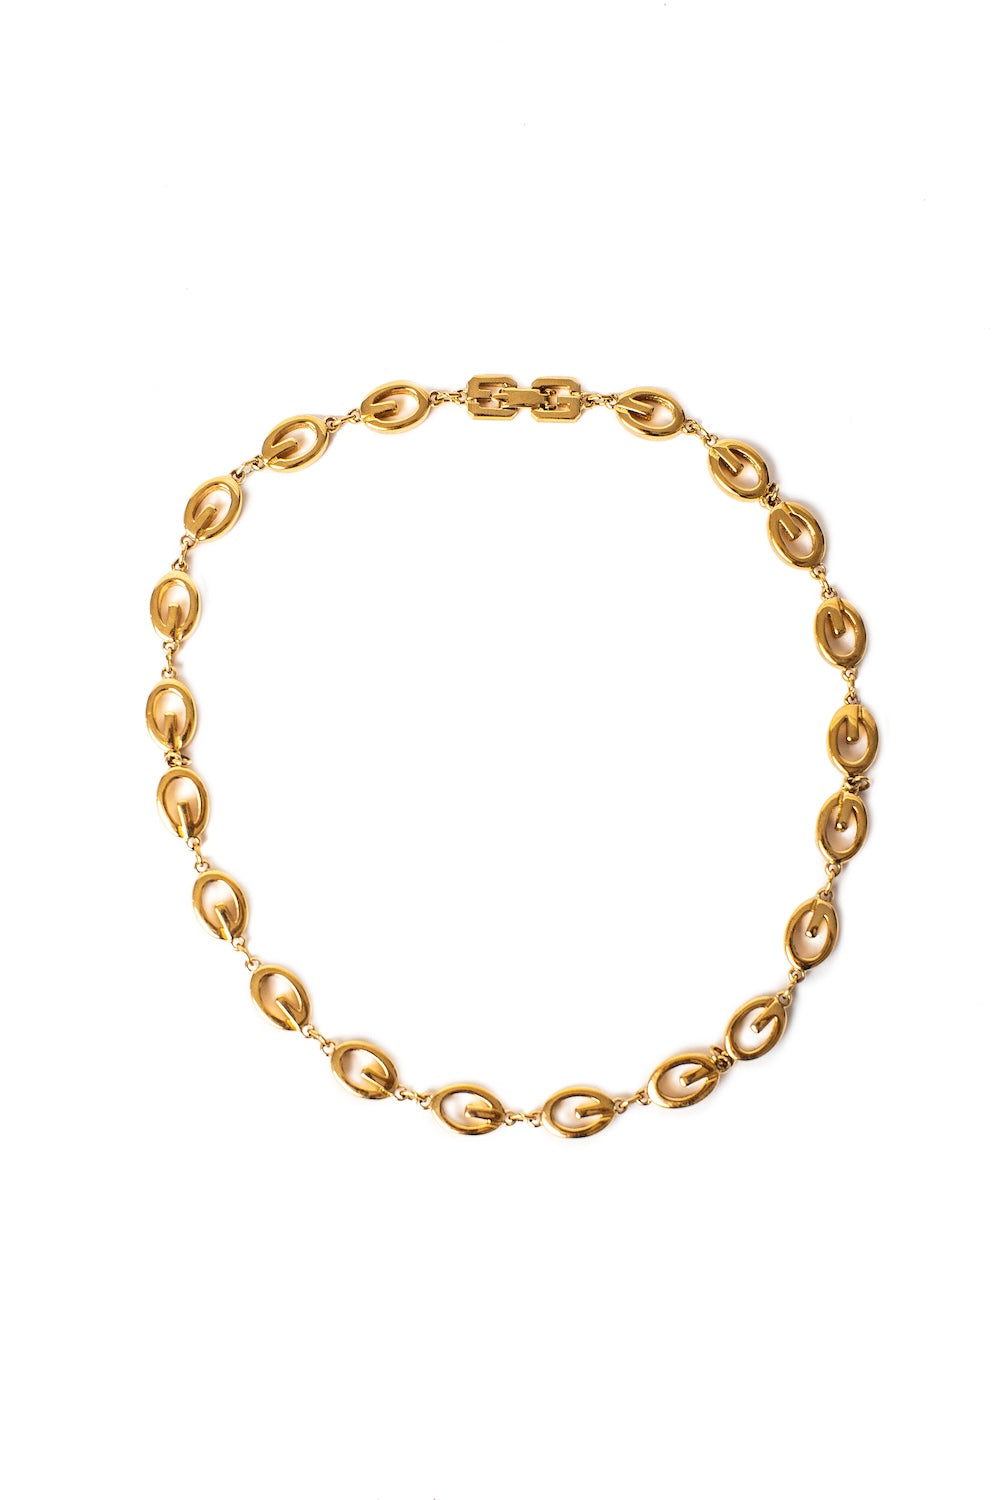 Givenchy <br> 80's gold G logo link choker chain necklace